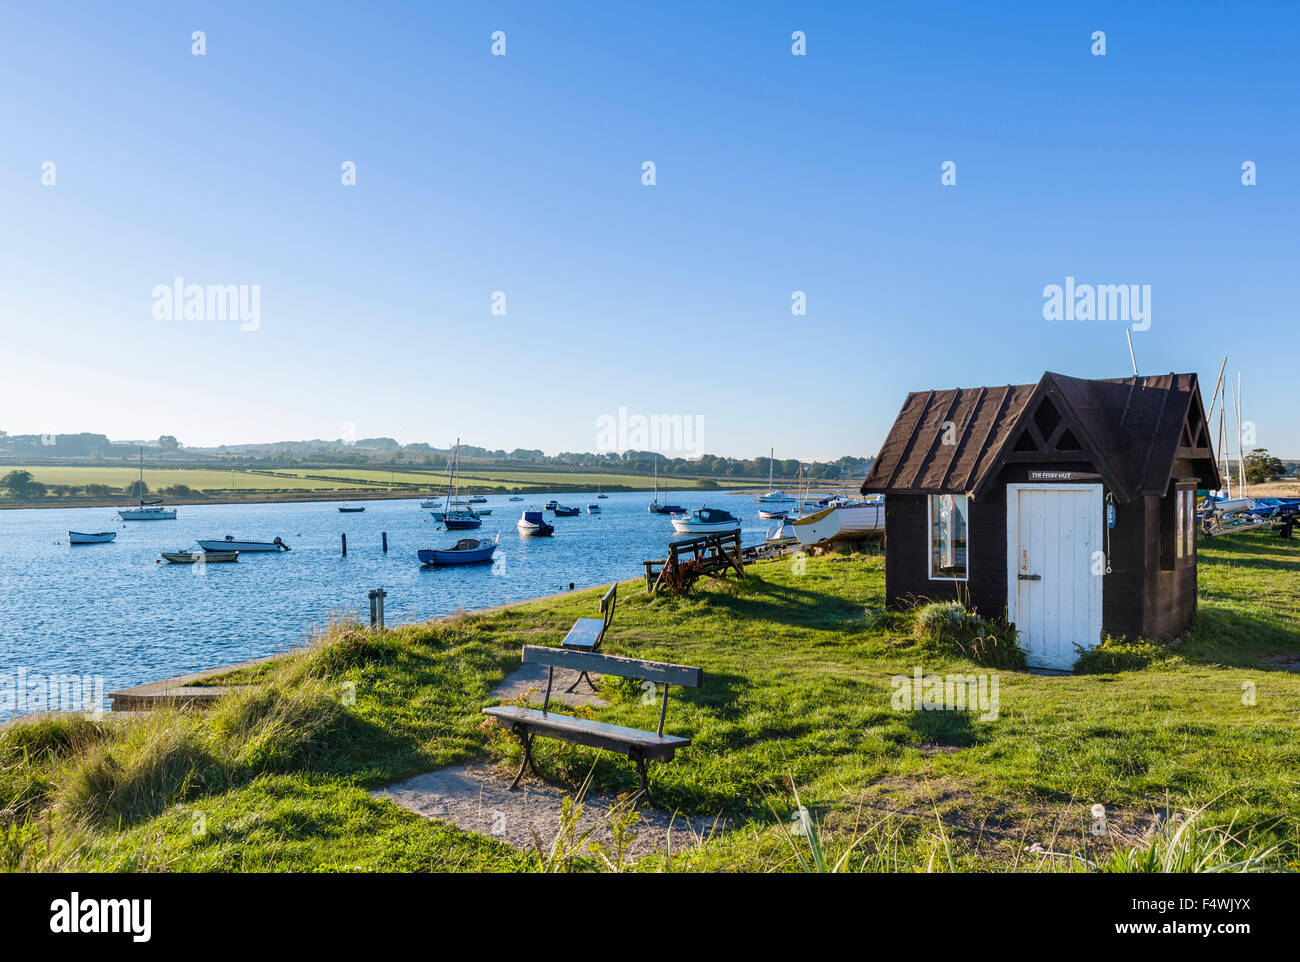 The Ferry Hut and boats moored at the mouth of the River Aln, Alnmouth, Northumberland, England, UK Stock Photo